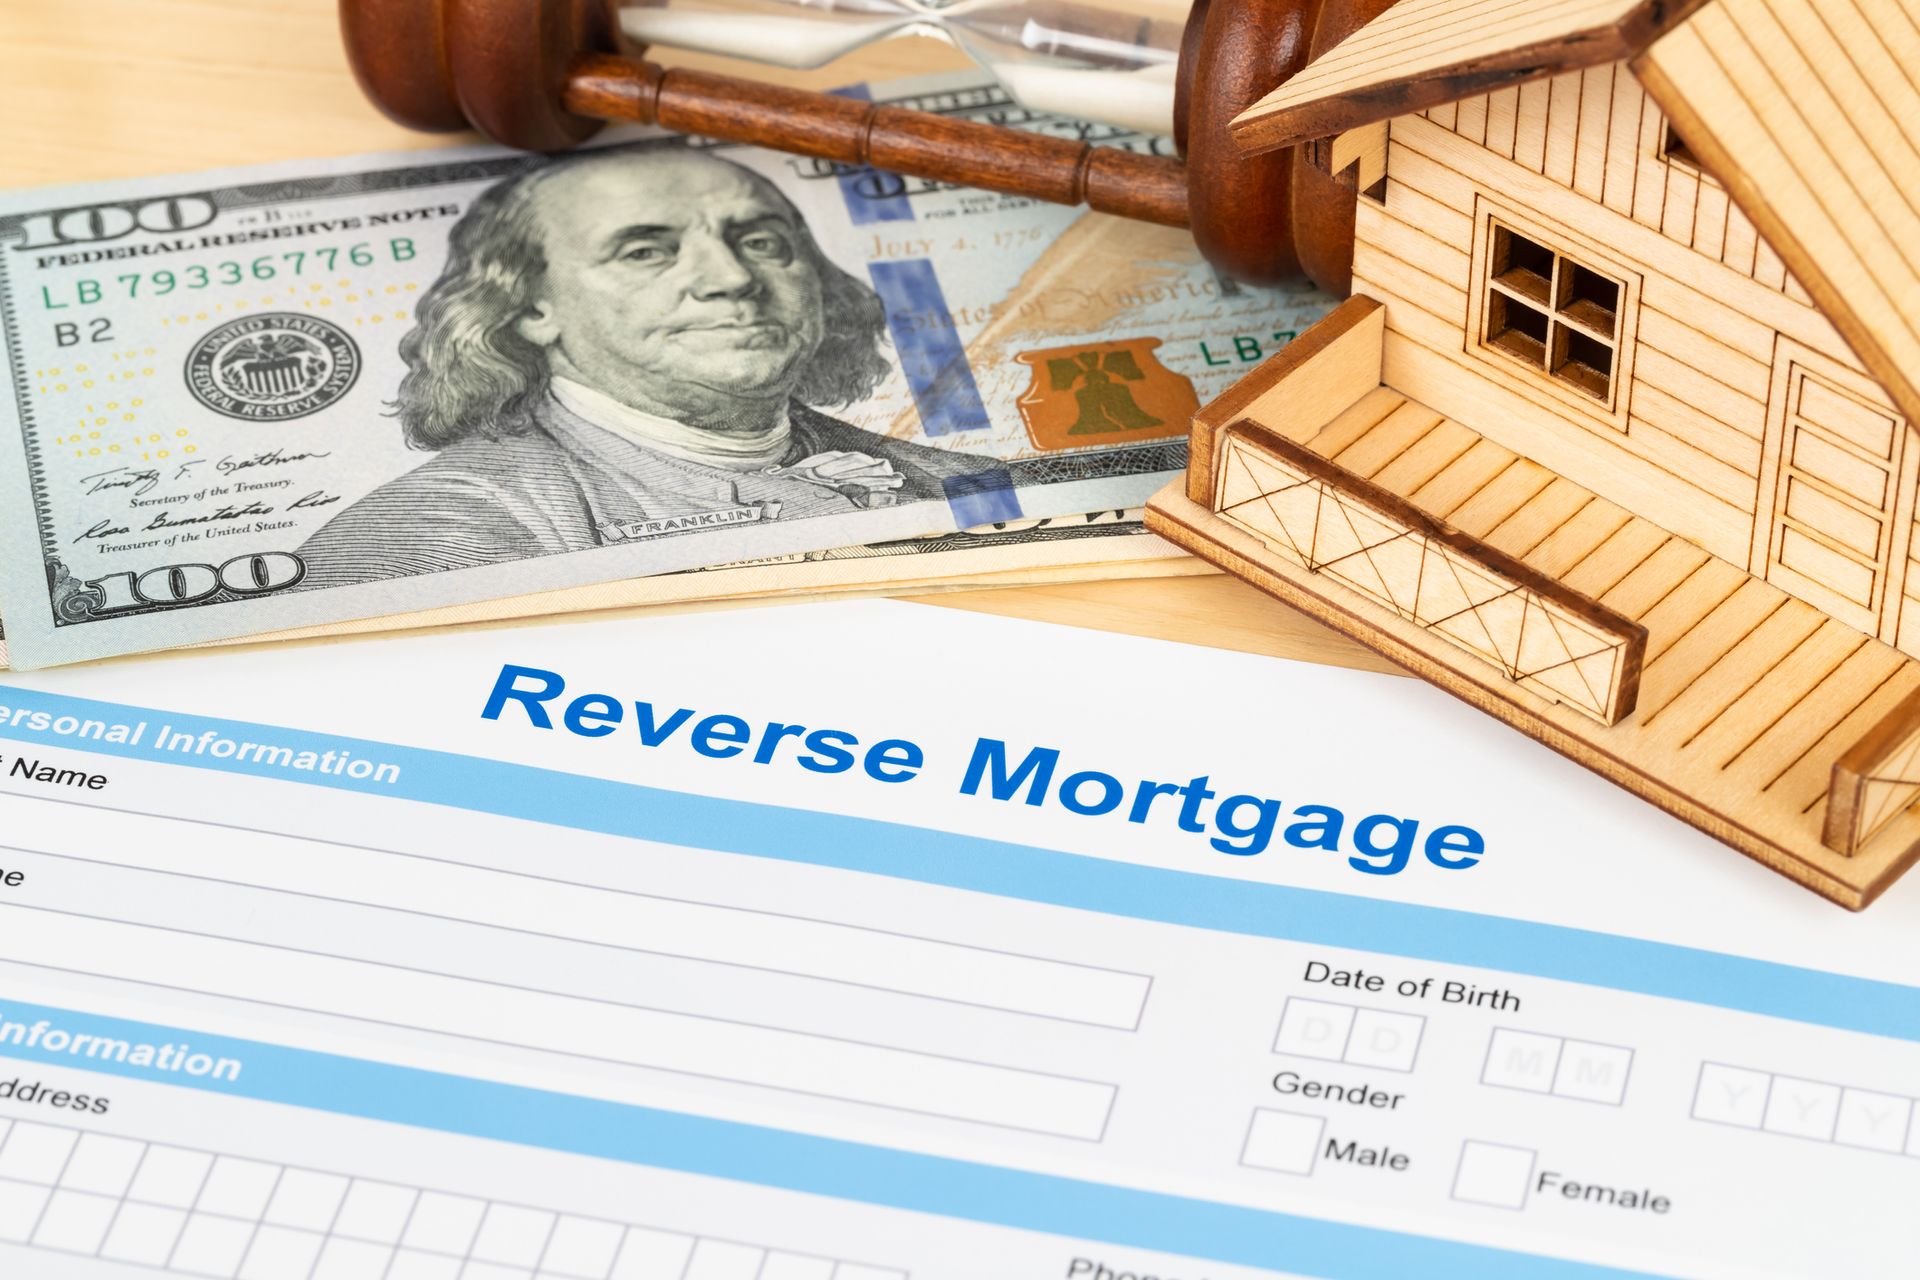 Reverse Mortgage and how itb works.